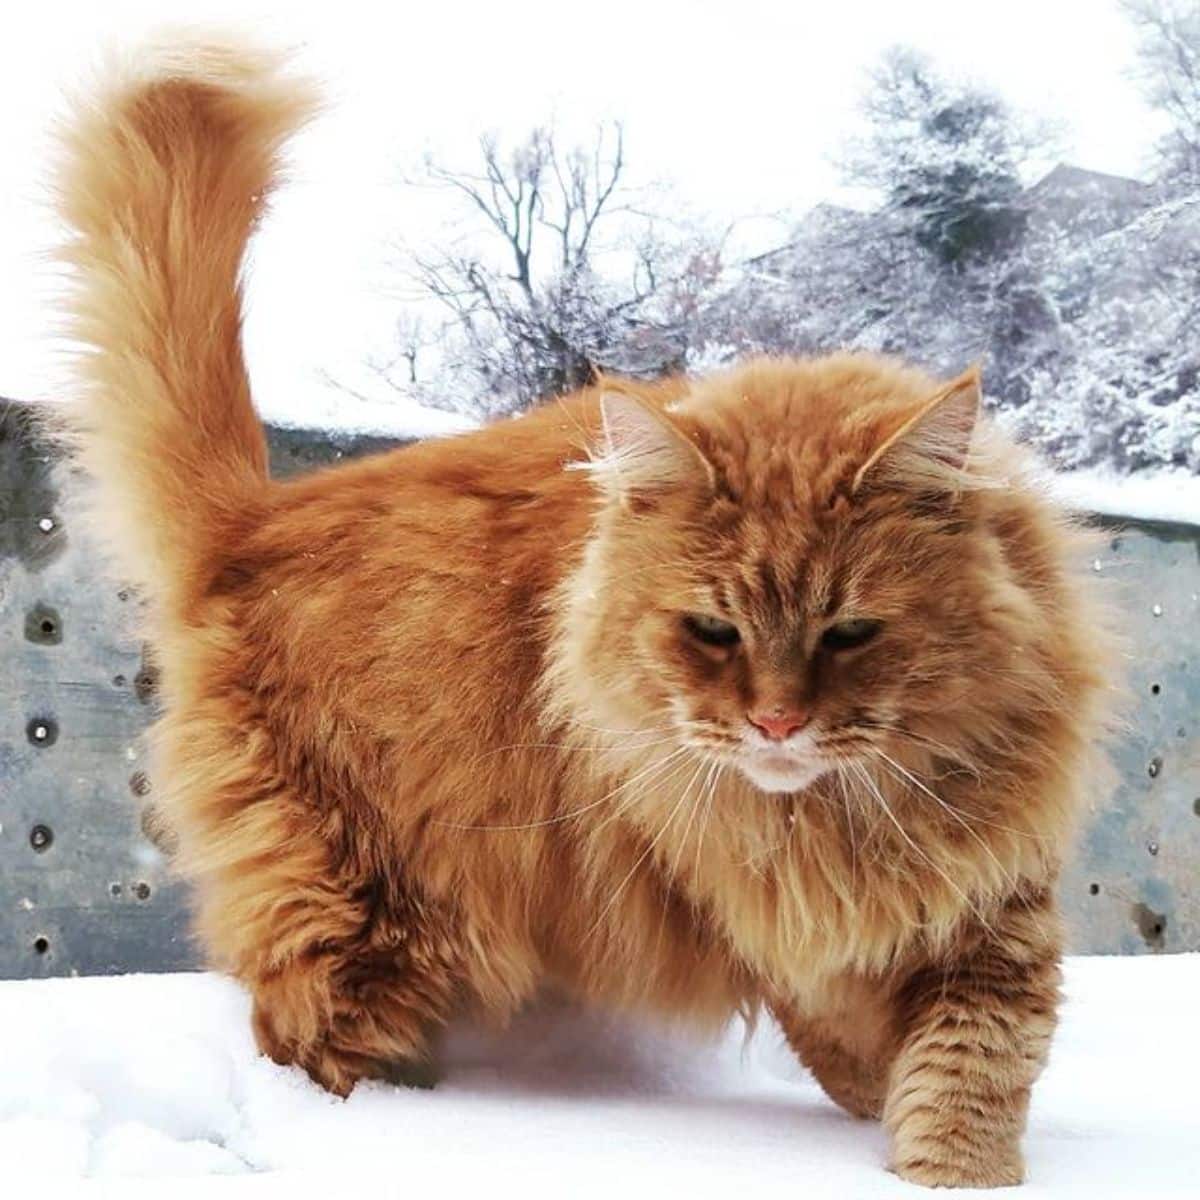 A fluffy ginger maine coon walking in the snow.